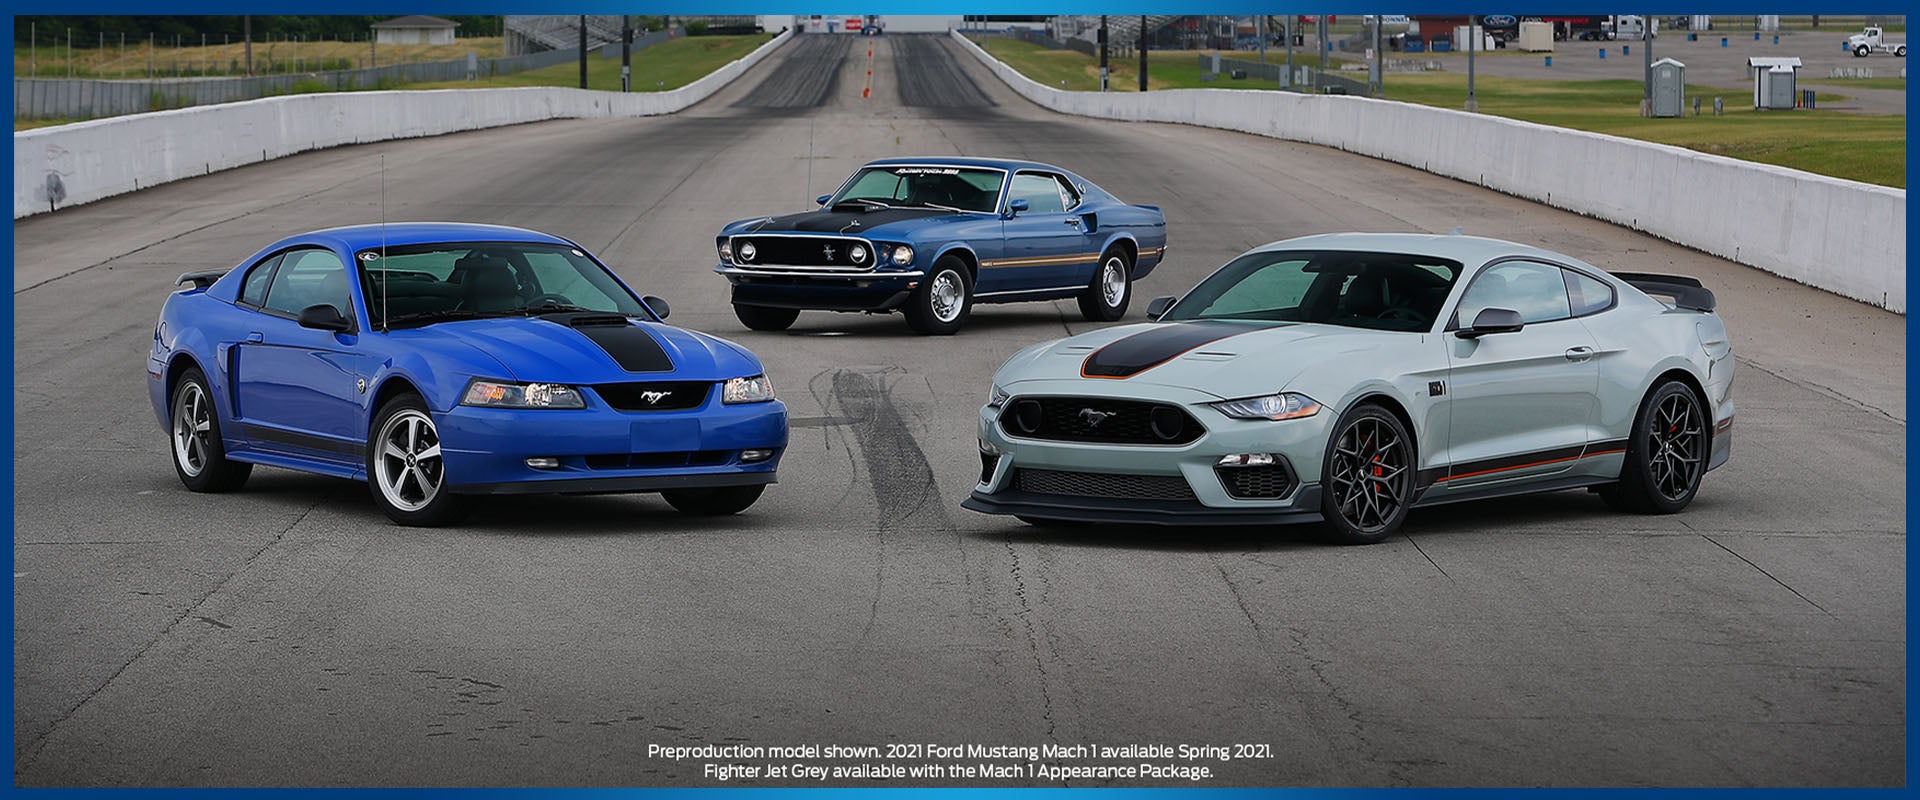 2021 Ford Mustang Mach 1 specs